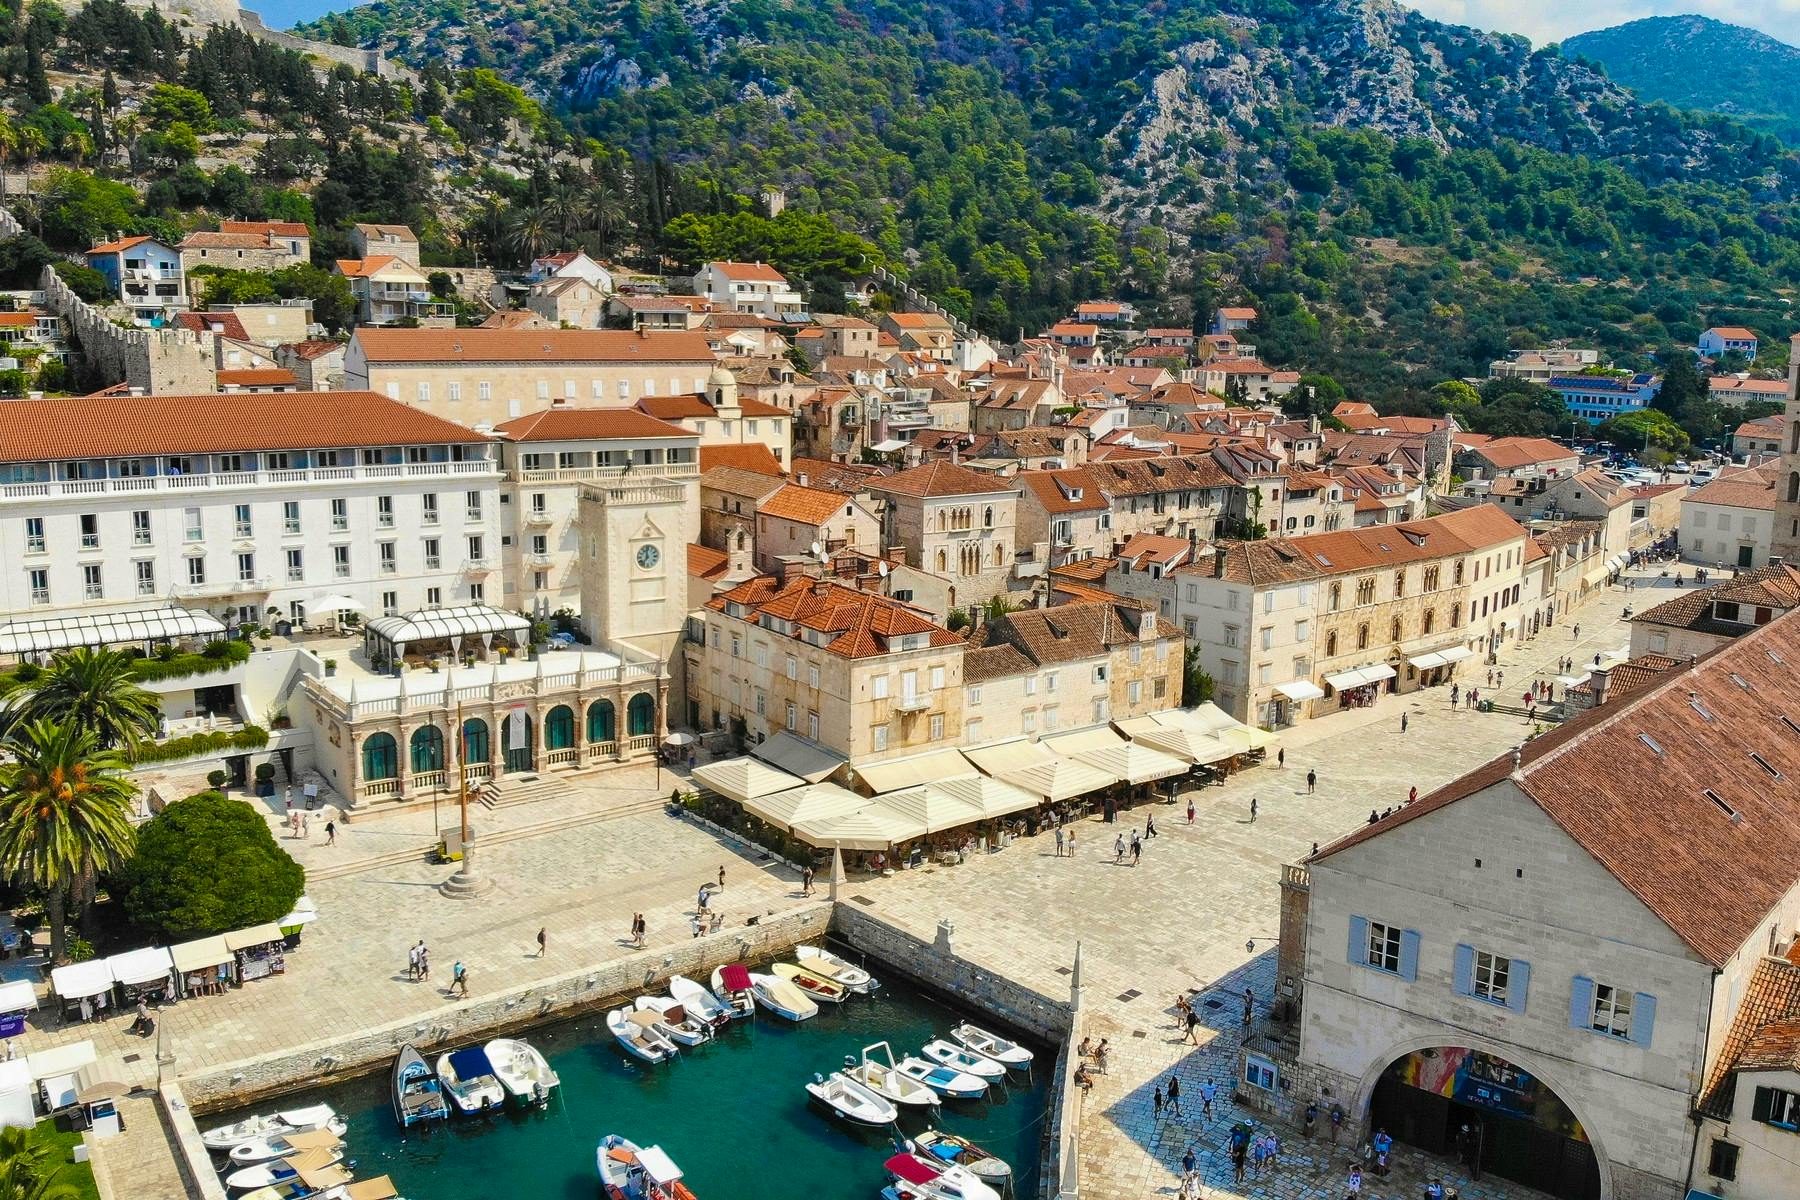 Unique investment opportunity in Hvar town